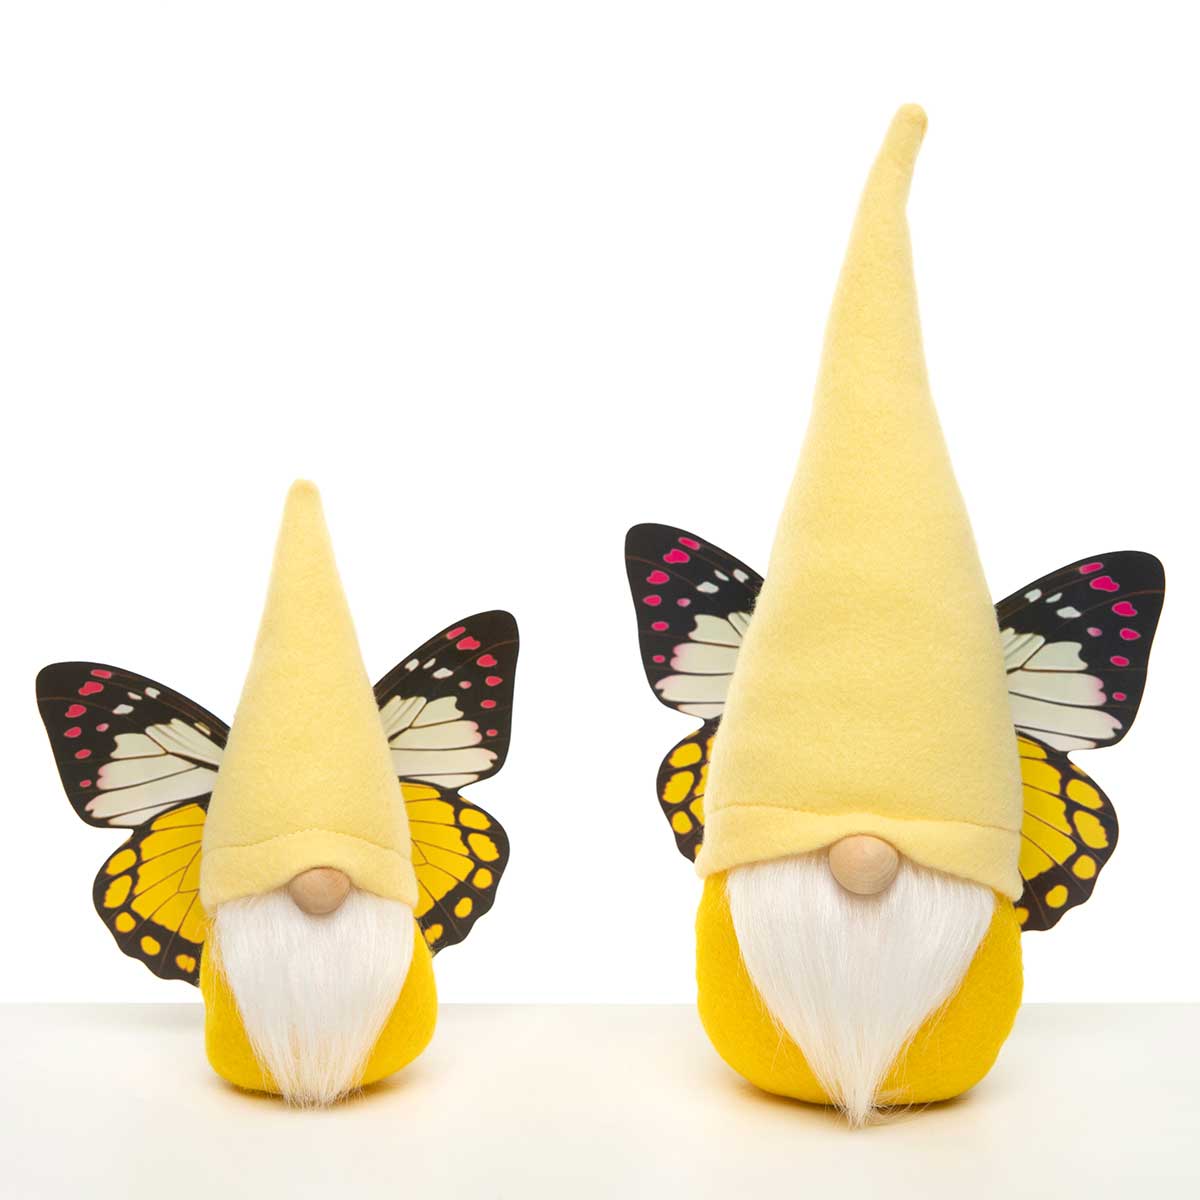 b50 BUTTERFLY GNOME YELLOW WITH WINGS SMALL 6"X2.75"X7"